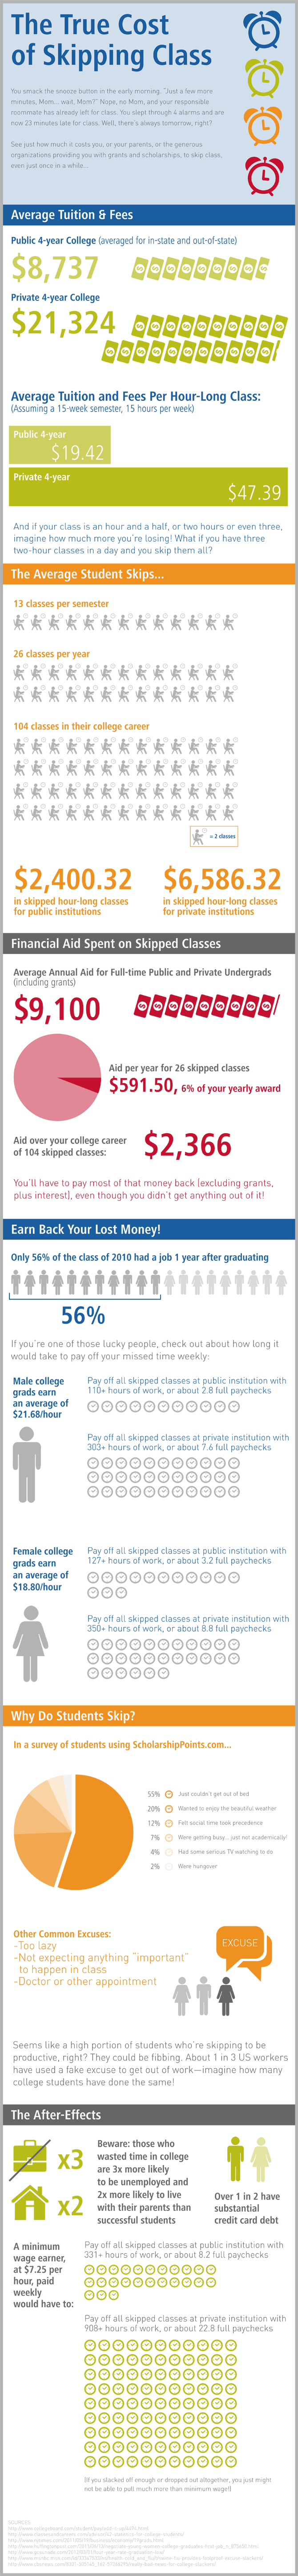 The True Cost of Skipping Class